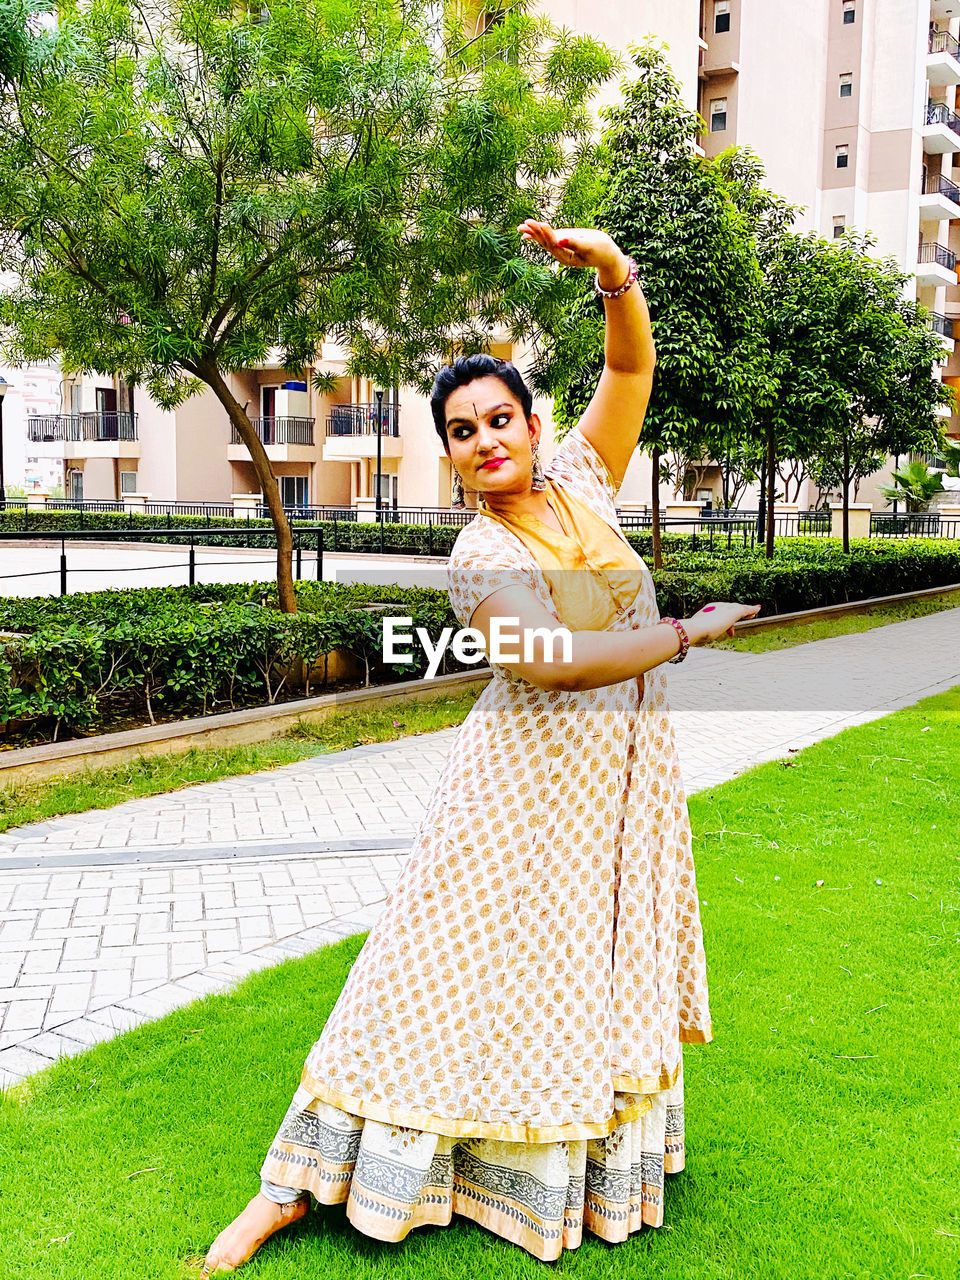 Portrait of smiling woman standing by plants, making a kathak pose